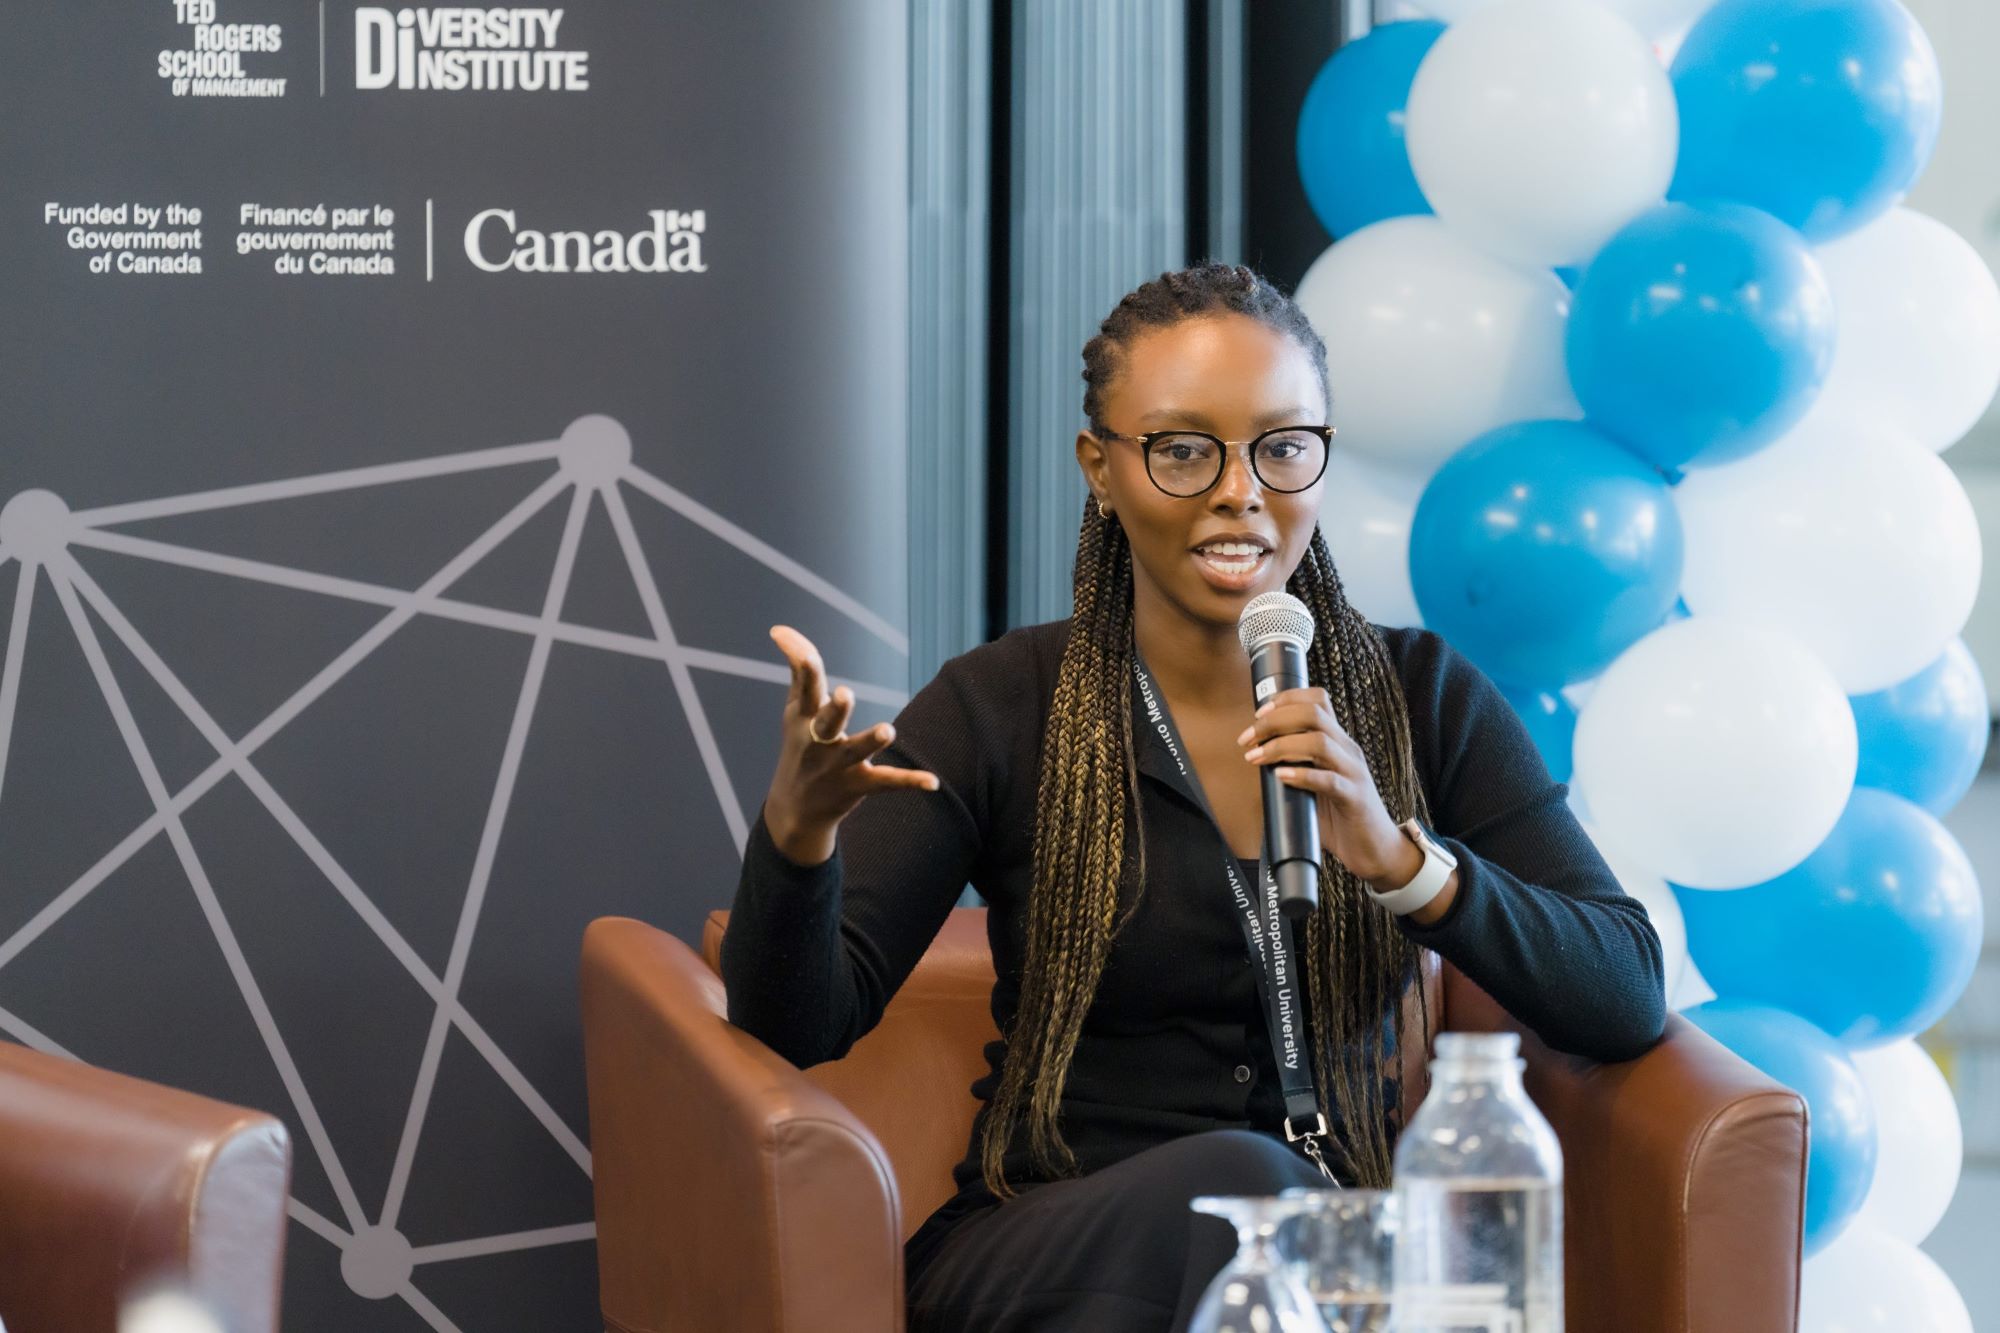 A young Black woman entrepreneur is seated during the panel conversation and speaks into a microphone.